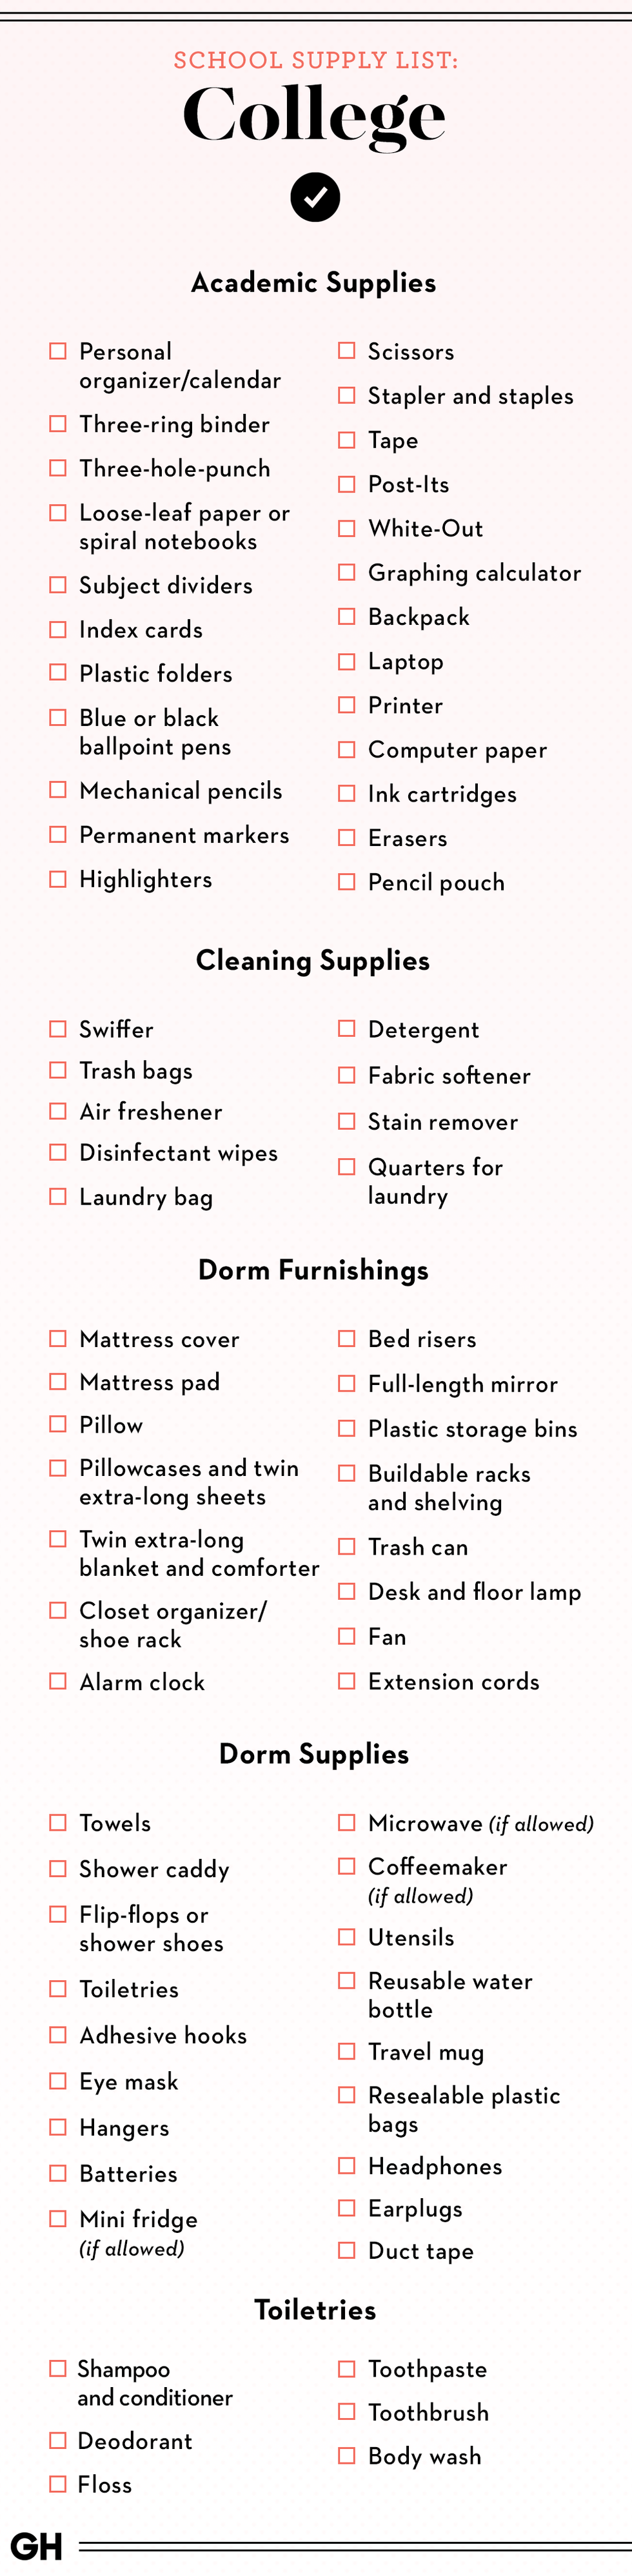 New House Checklist For The Supplies You Need